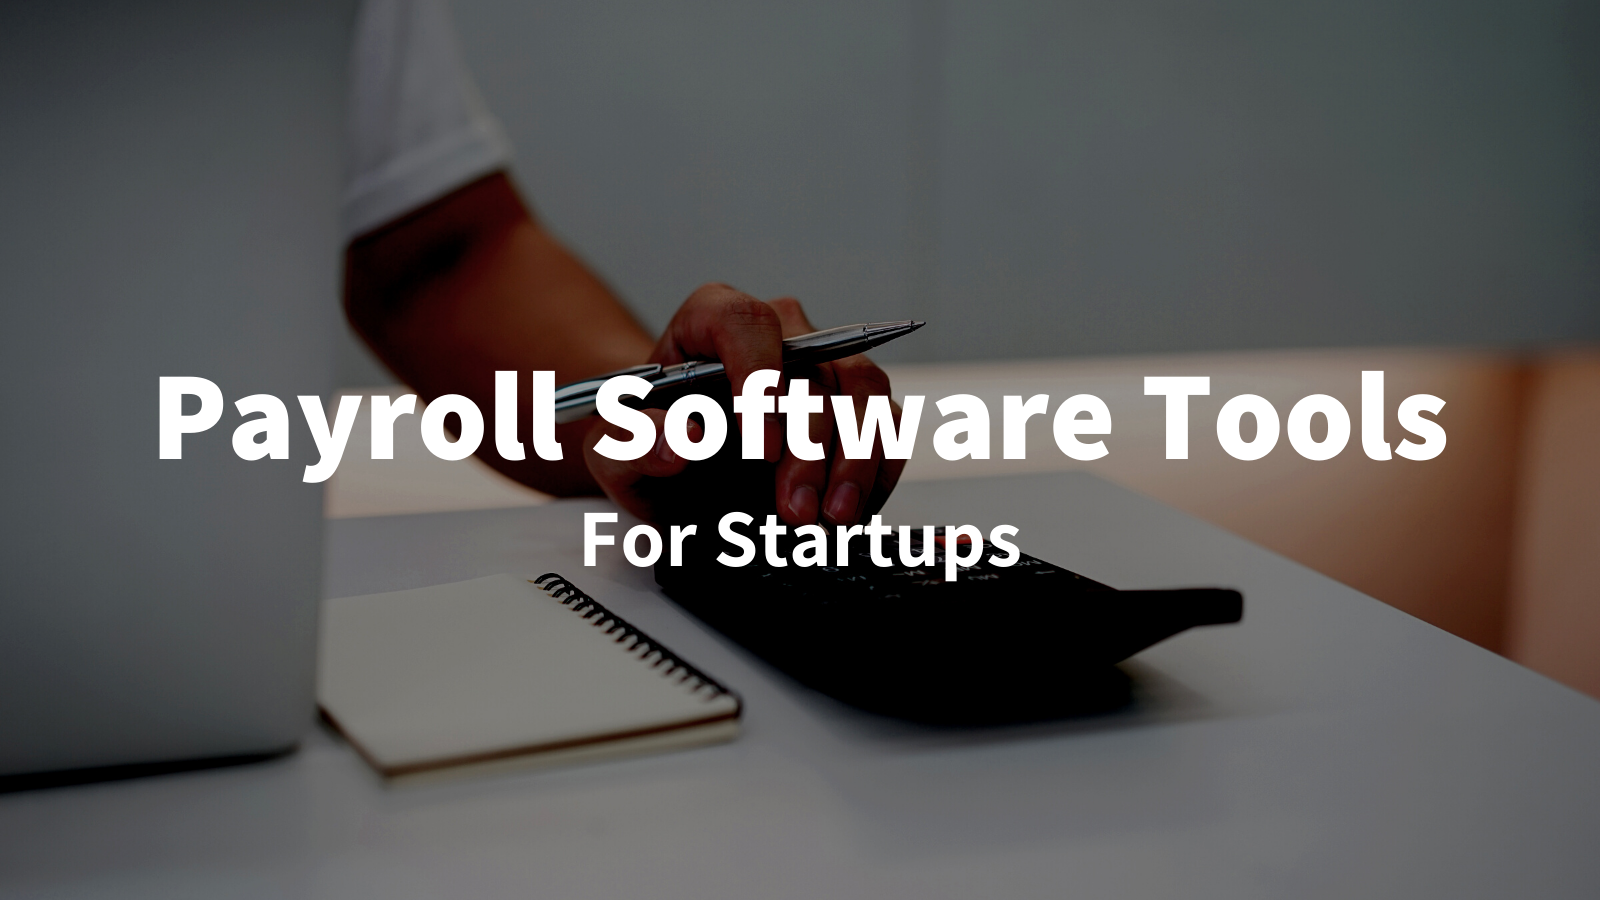 The 10 Best Payroll Software Tools for Startups